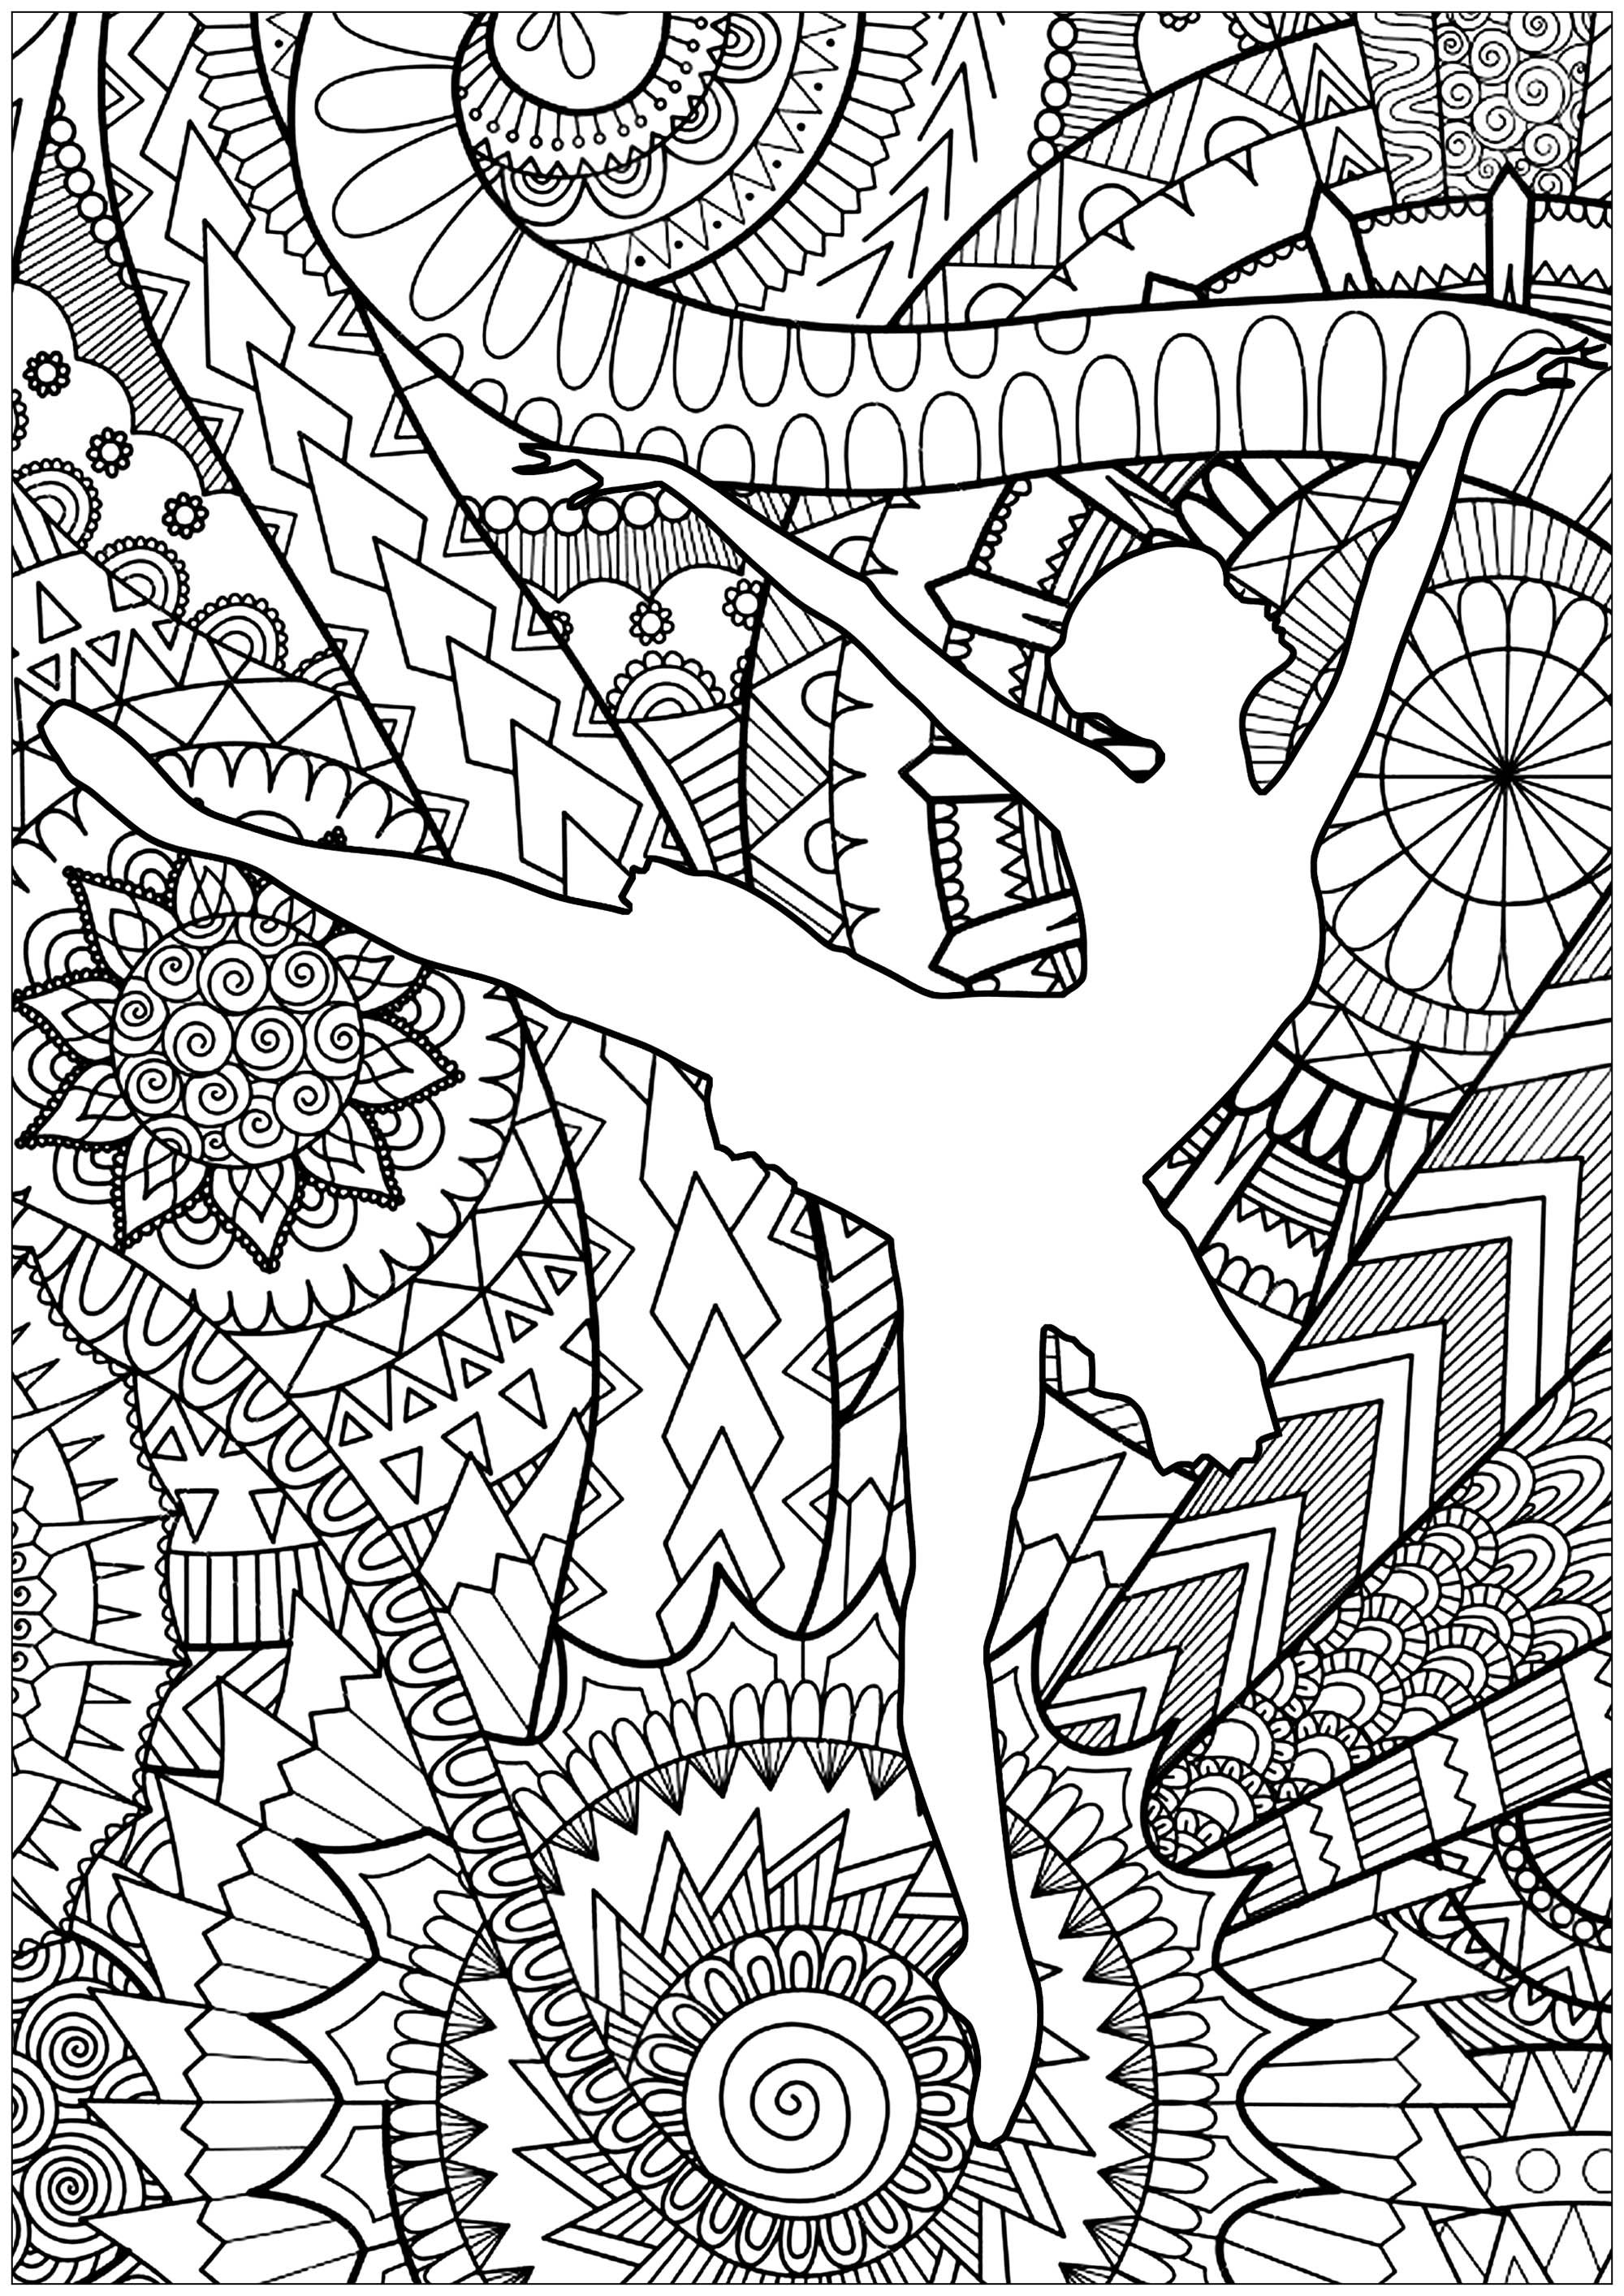 ballet-dancer-anti-stress-adult-coloring-pages